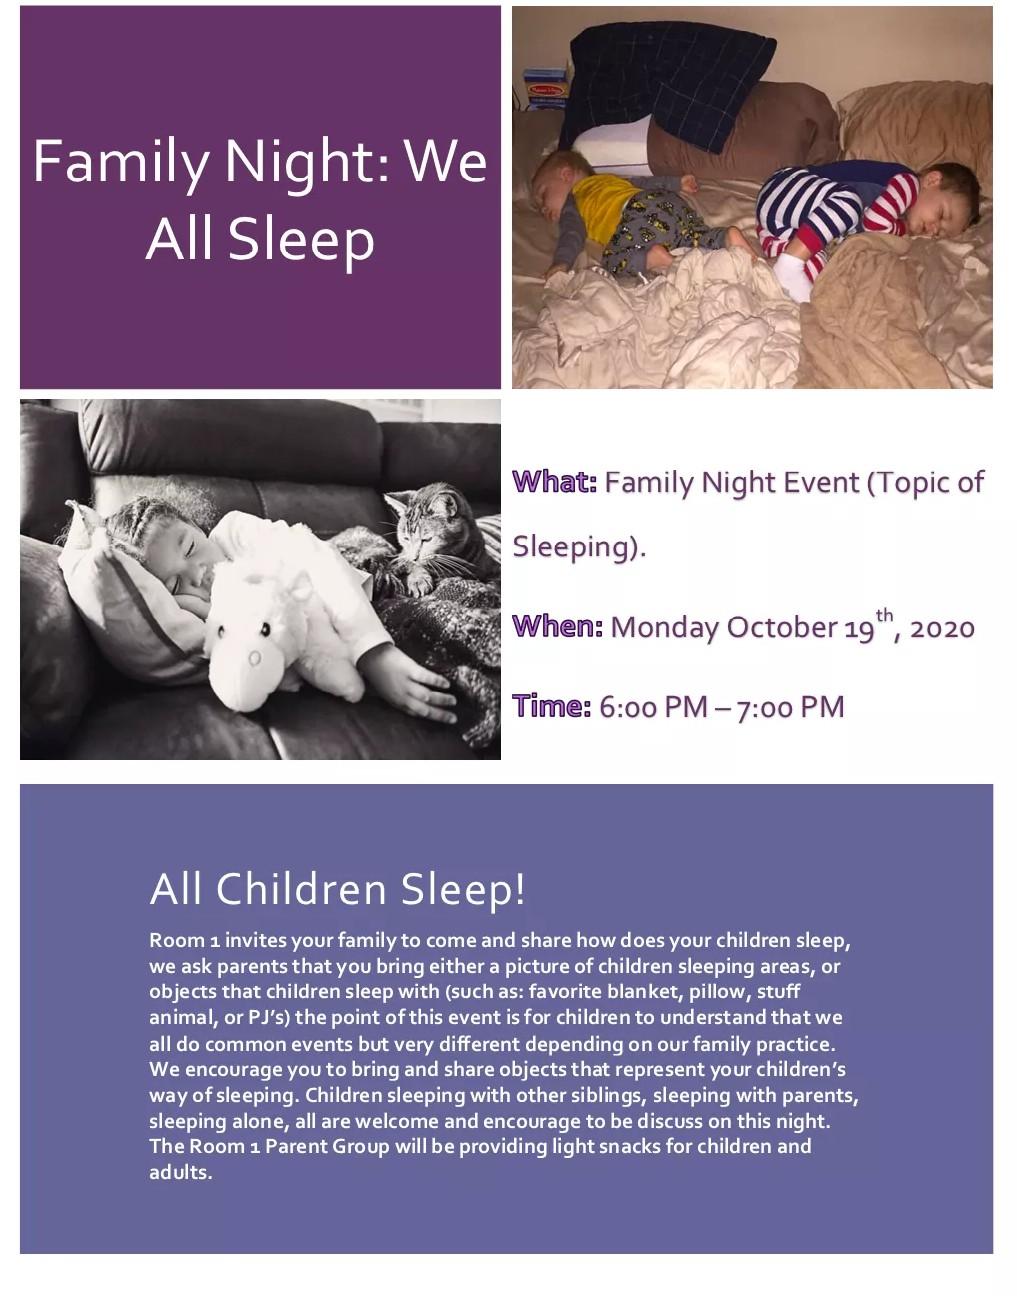 Family Night: We All Sleep What: Family Night Event (Topic of Sleeping). When: Monday October 19th, 2020 Time: 6:00 PM – 7:00